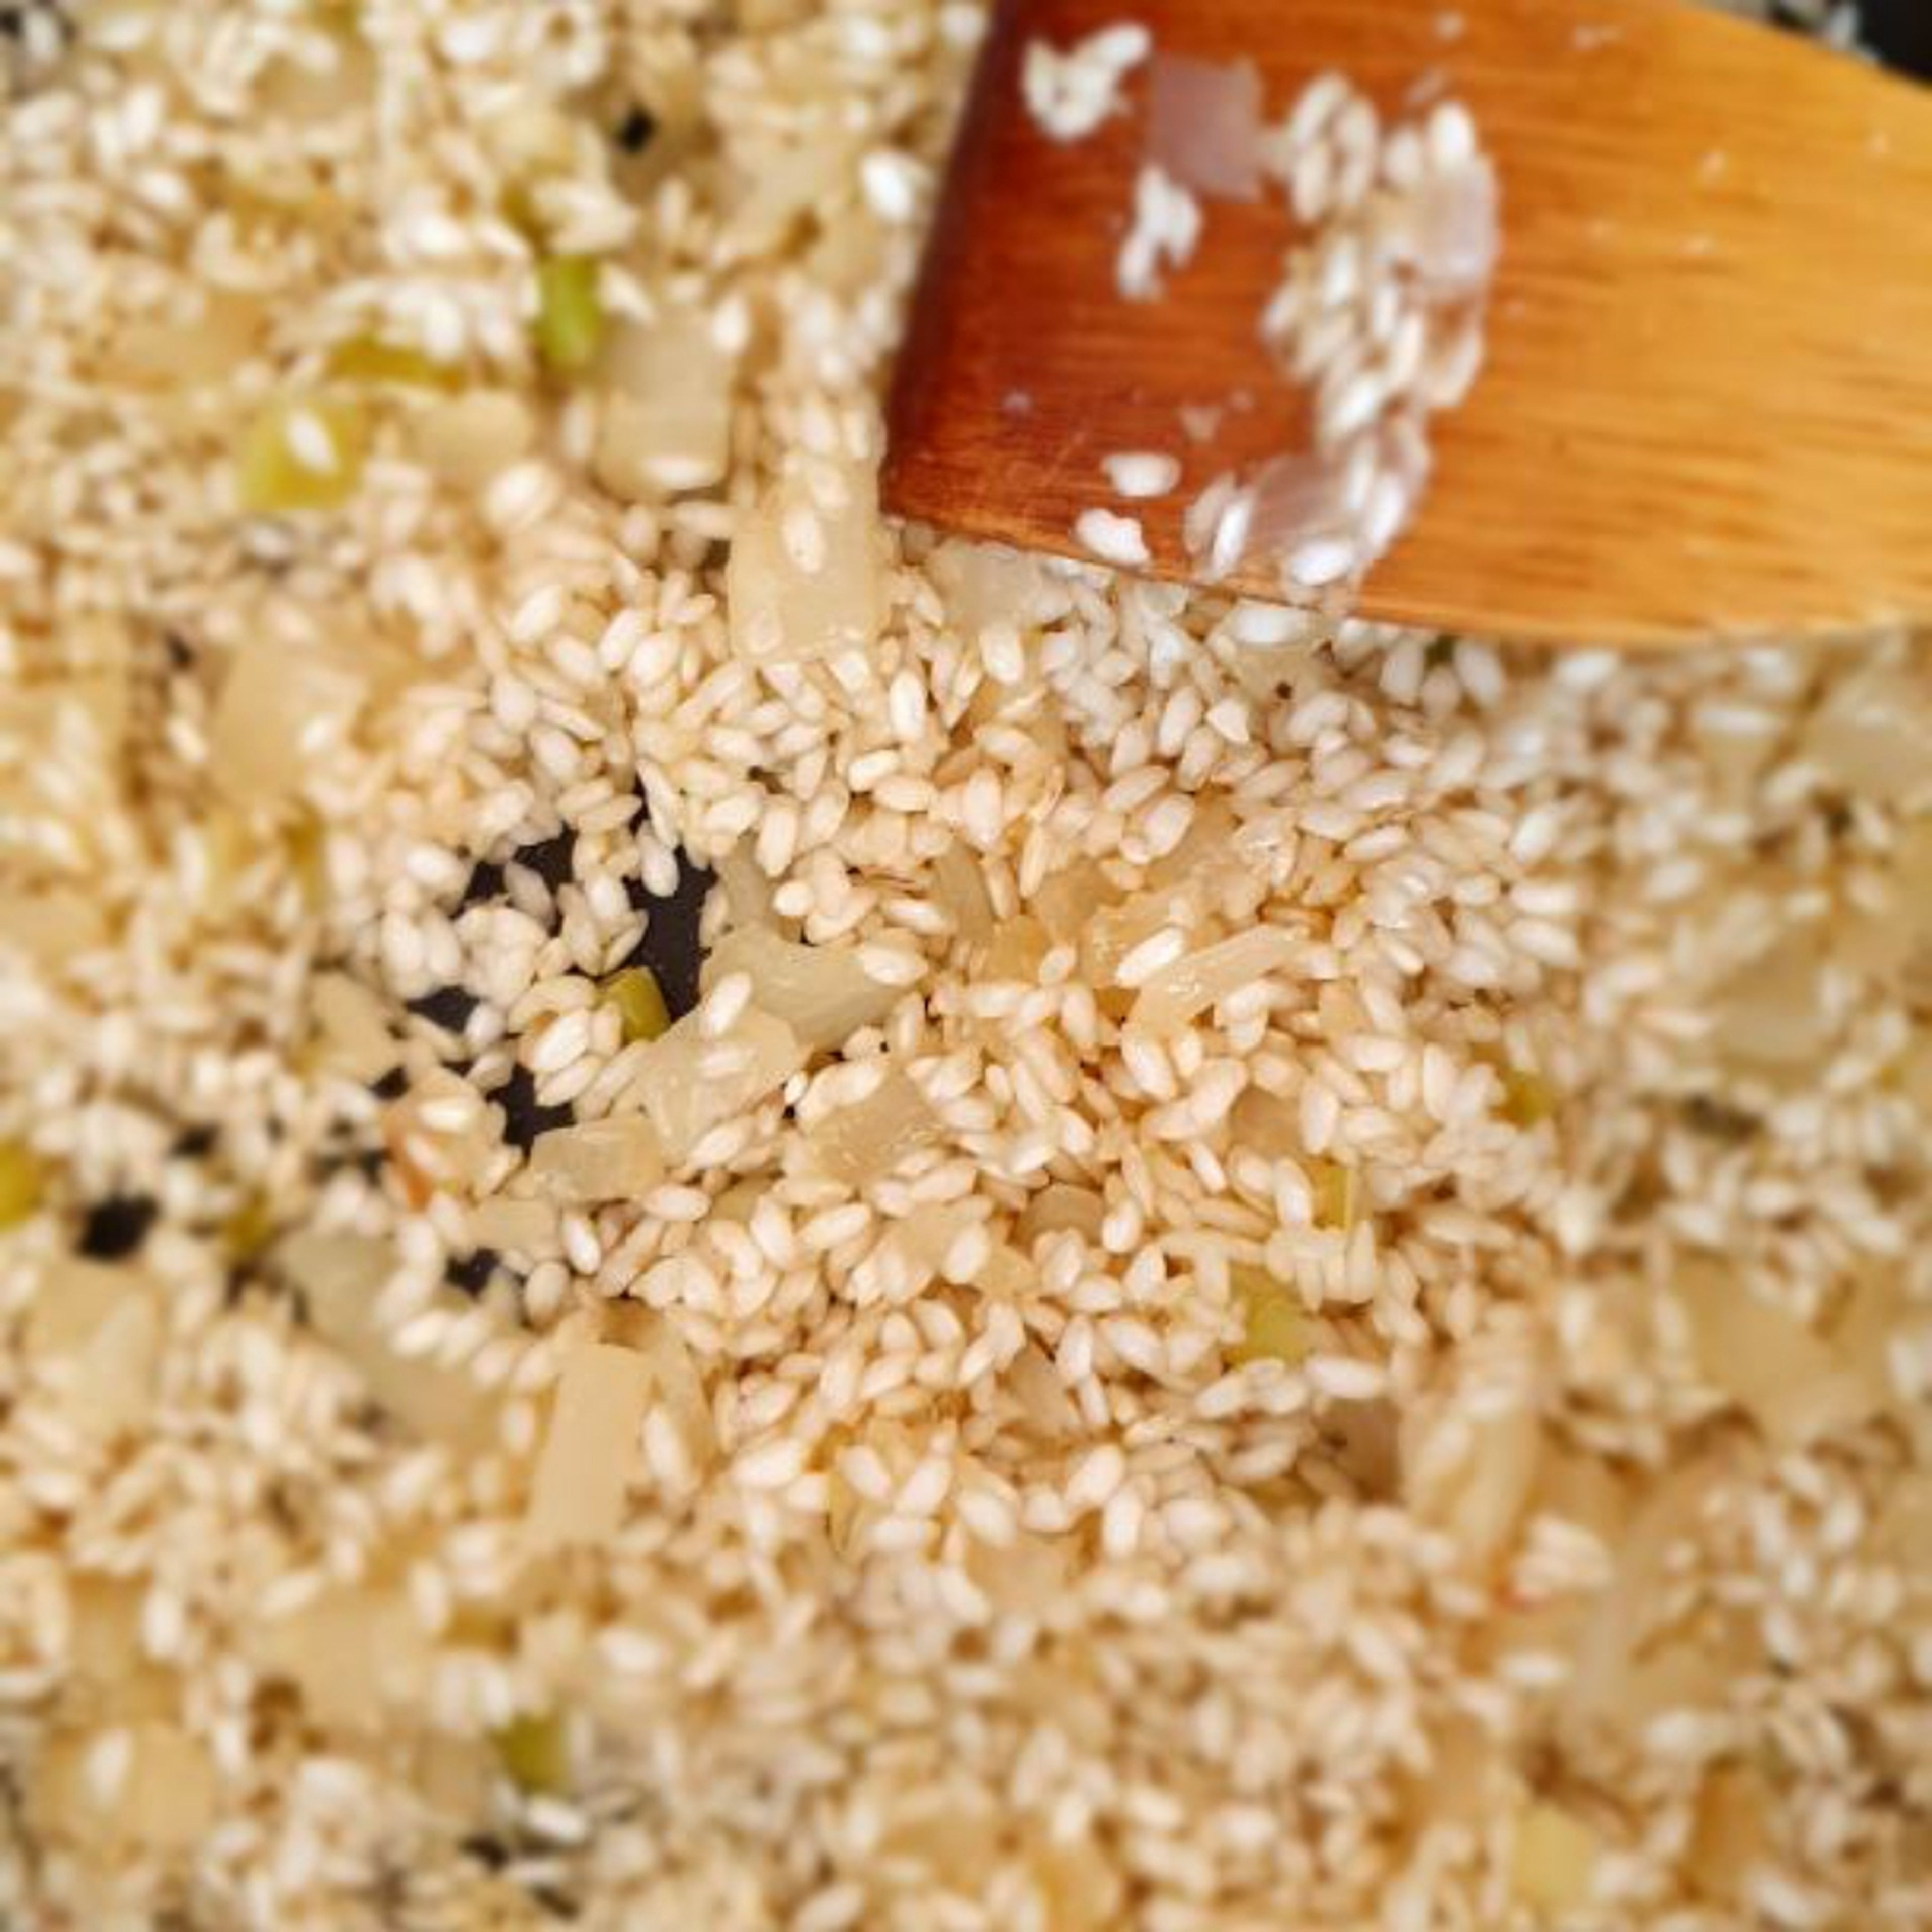 Add the rice and cook for about a minute until it begins to turn slightly translucent. Stir often, coating the rice.